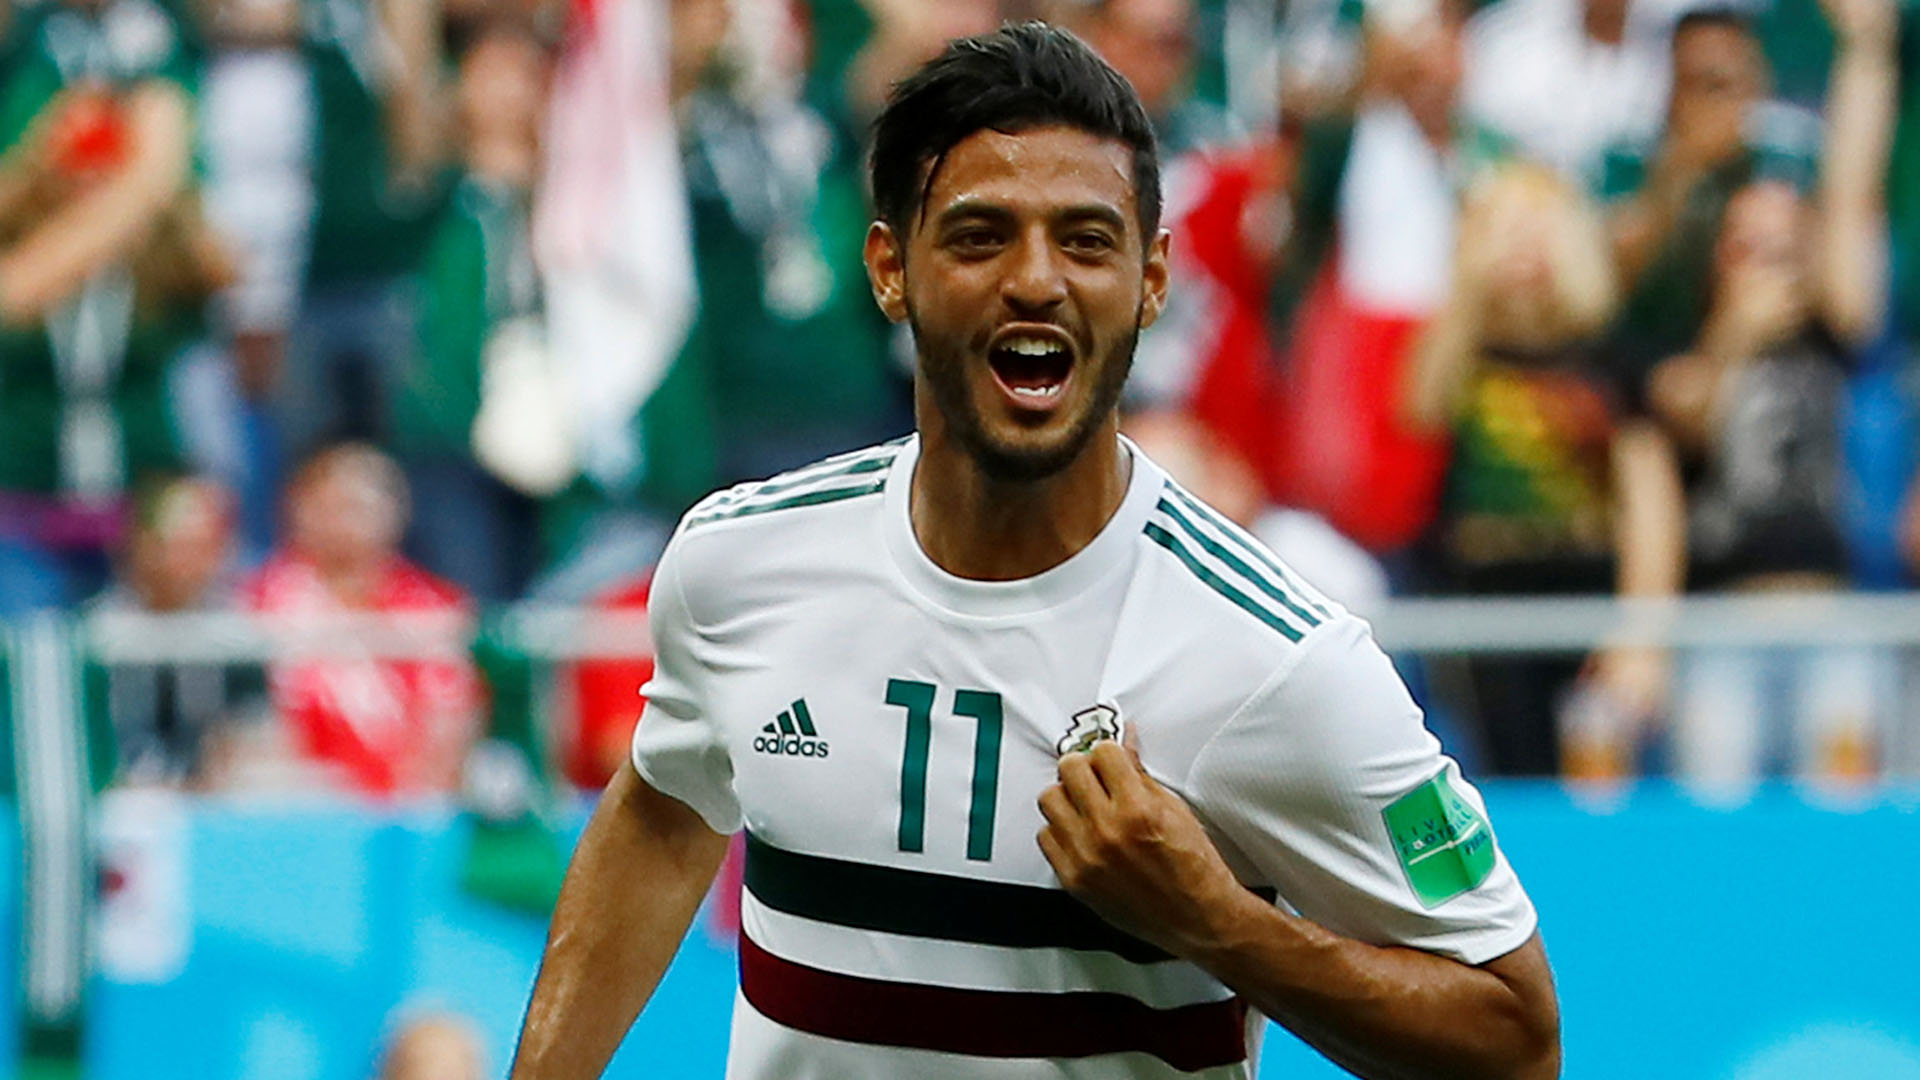 Soccer Football - World Cup - Group F - South Korea vs Mexico - Rostov Arena, Rostov-on-Don, Russia - June 23, 2018   Mexico's Carlos Vela celebrates scoring their first goal         REUTERS/Jason Cairnduff